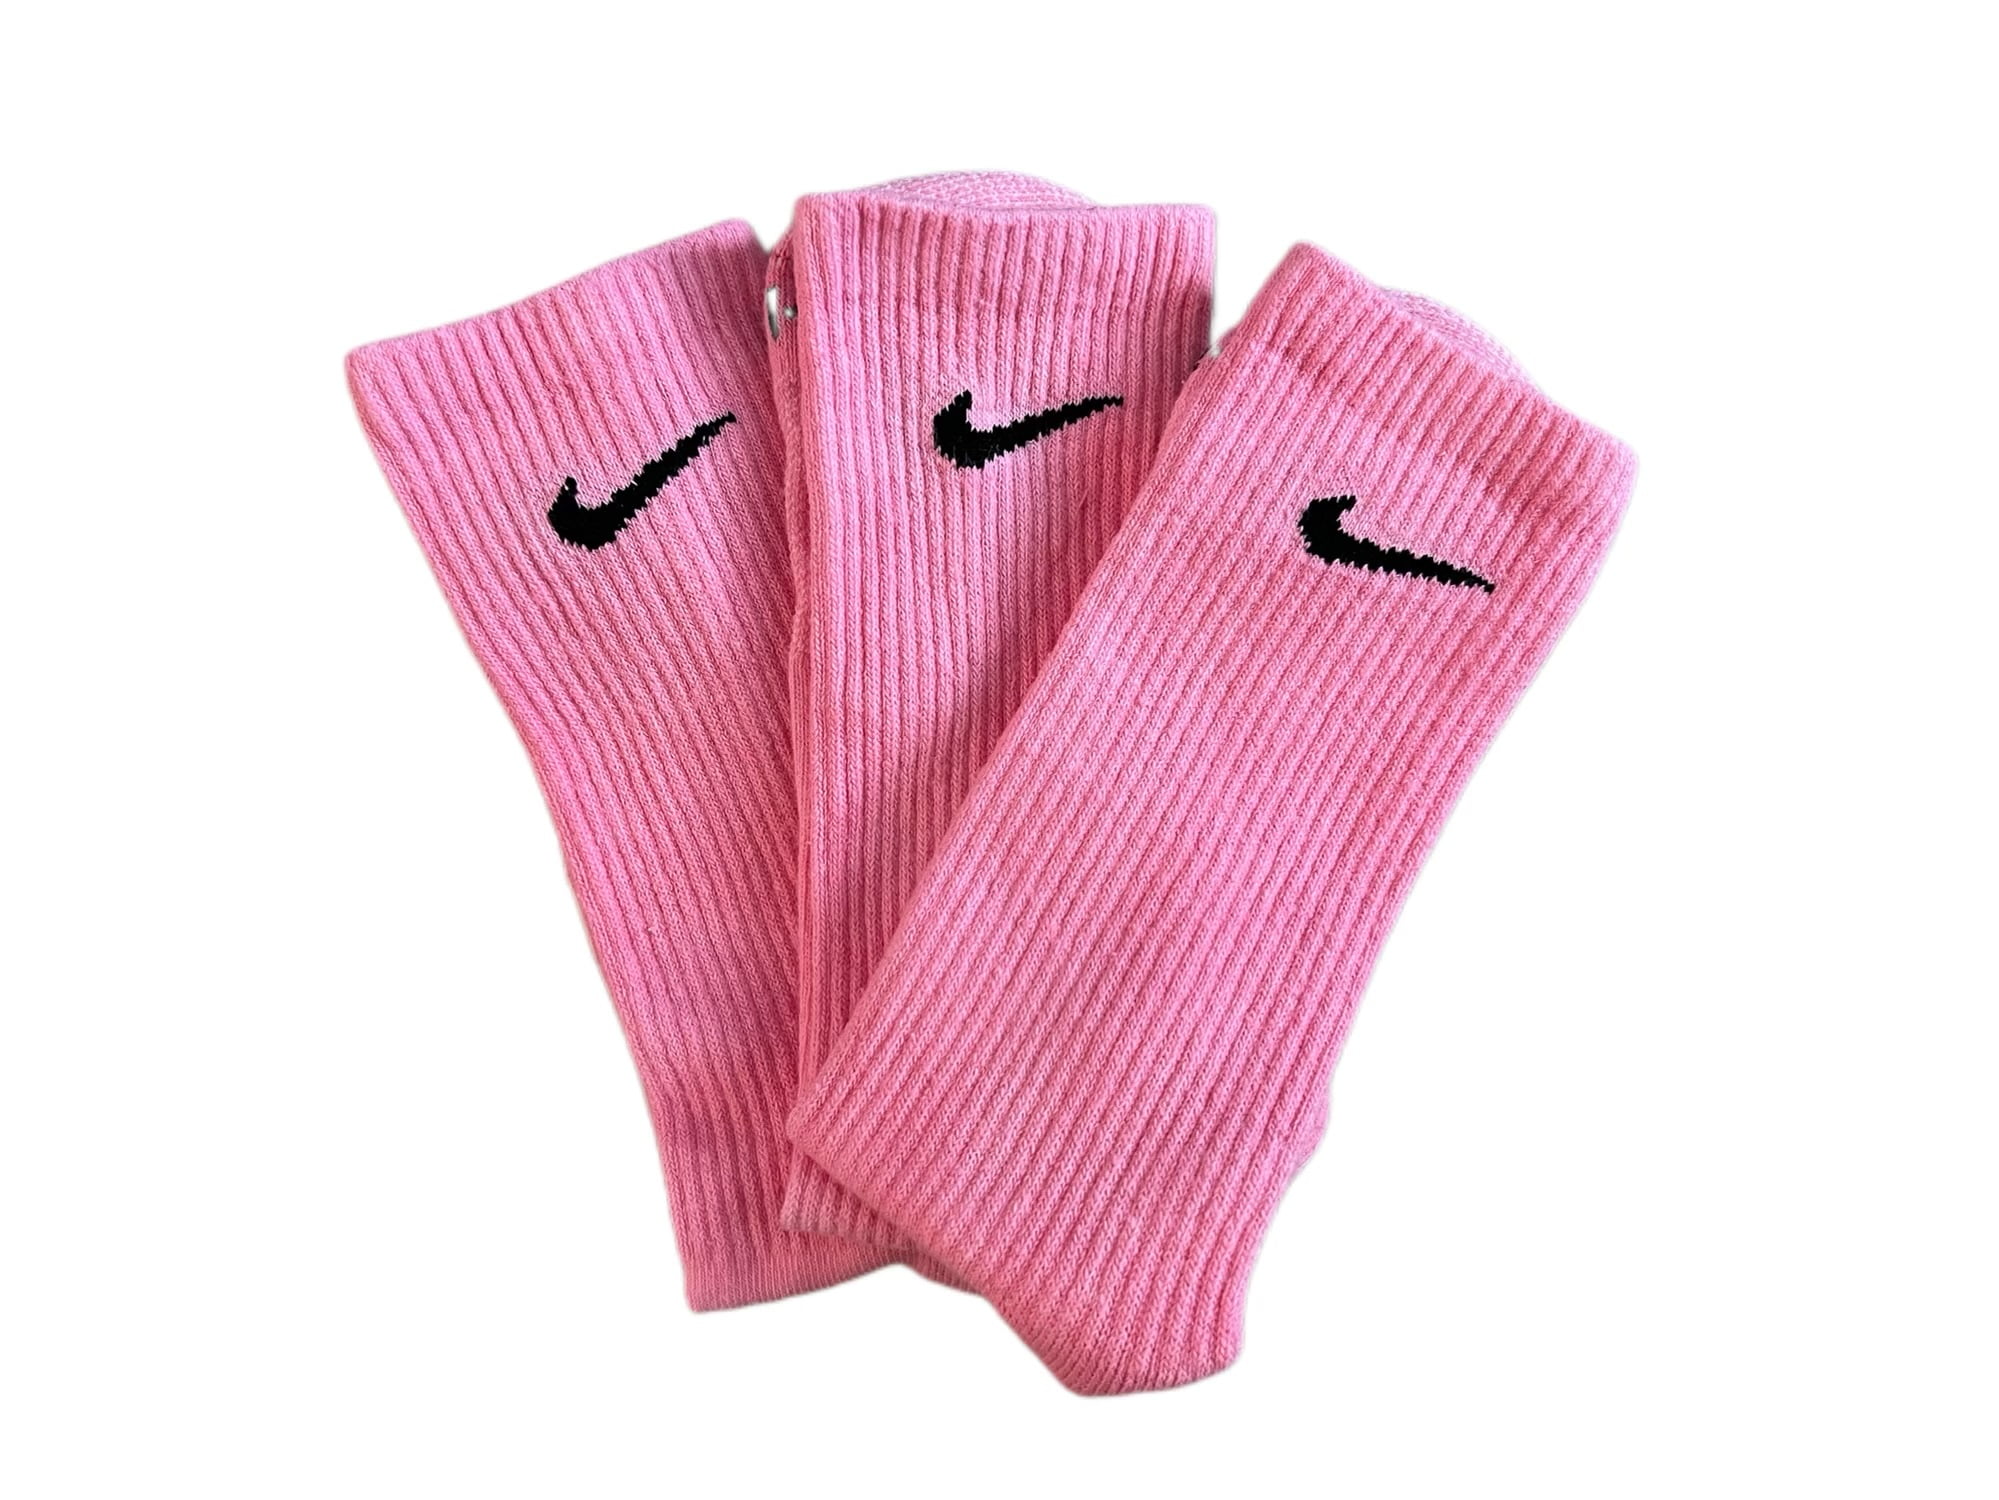 Punch Pink Pack Nike Crew Socks Dri Fit, Unisex Adult Large, 3 - Pack | Stoppersocken